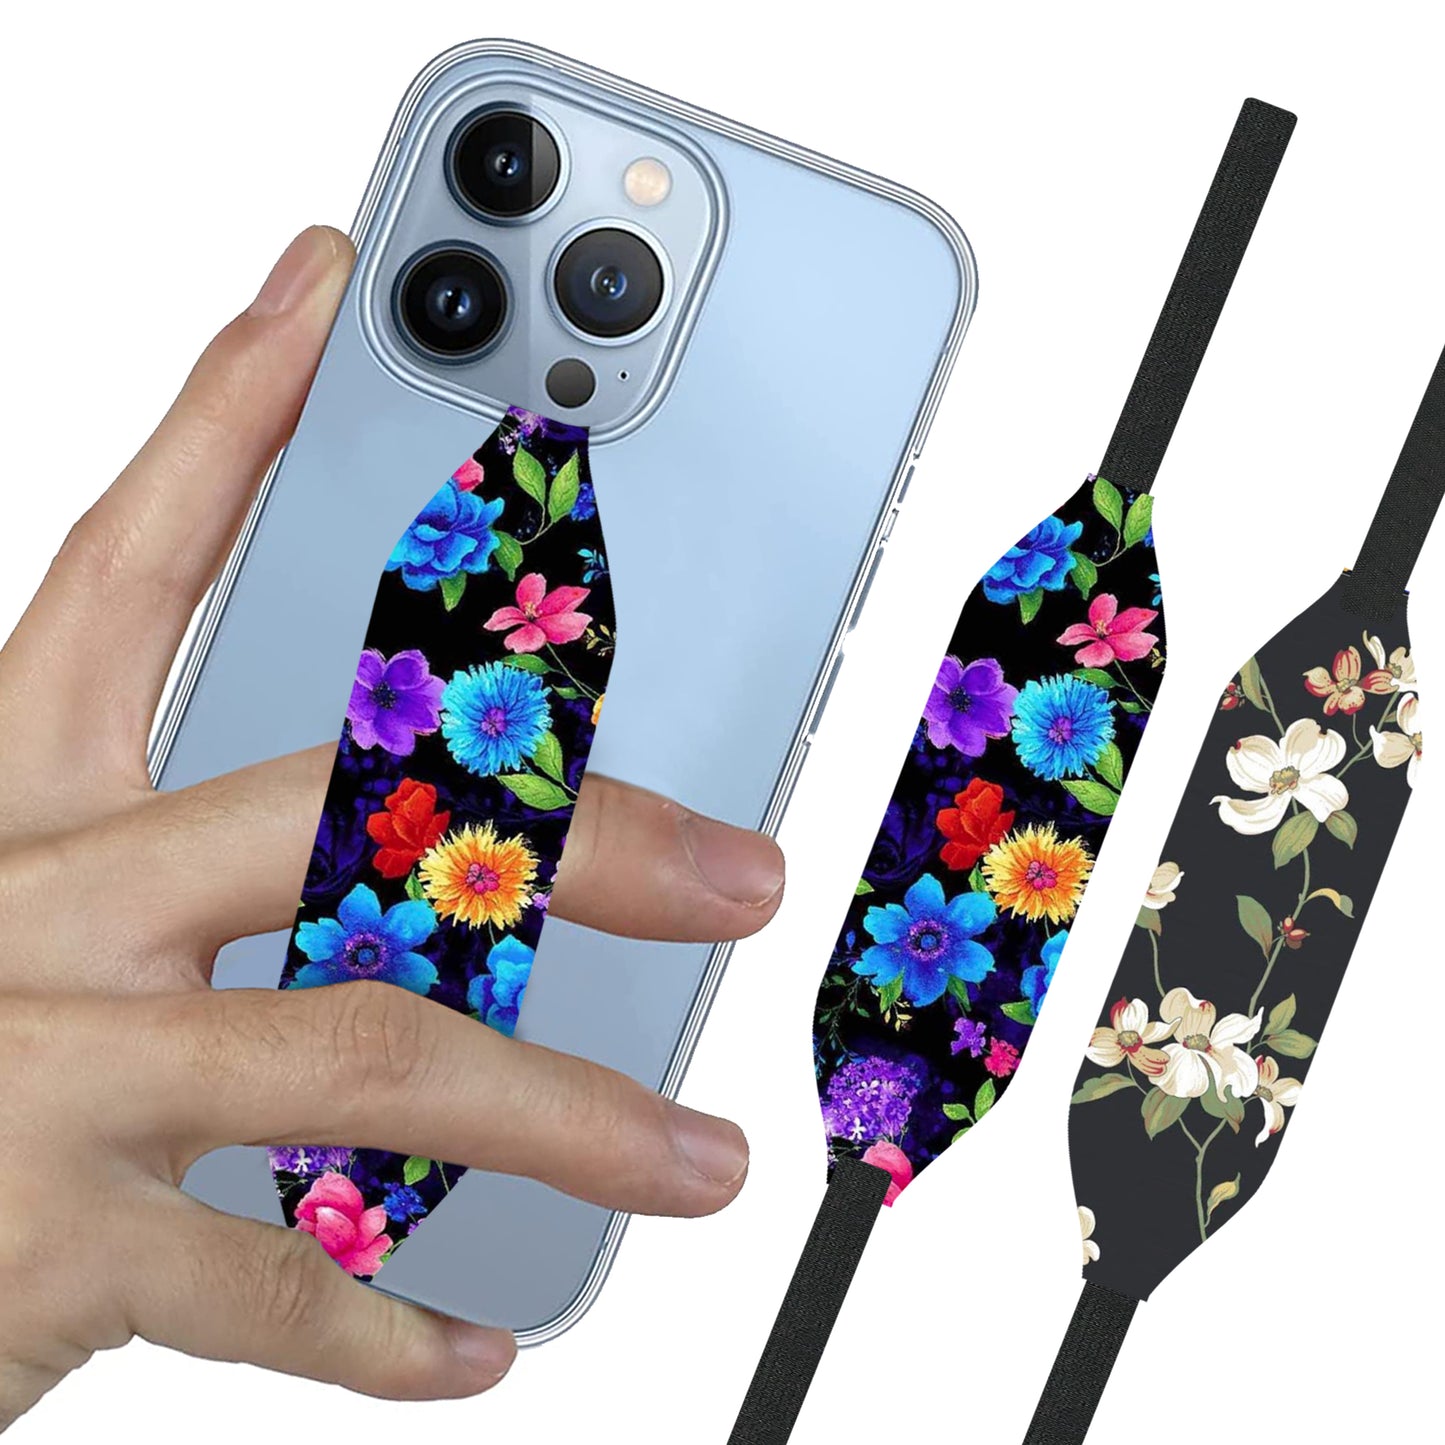 Switchbands Universal Stretchable Phone Hand Straps And Finger Loop For Phone Case - Yellow & Blue Mandala